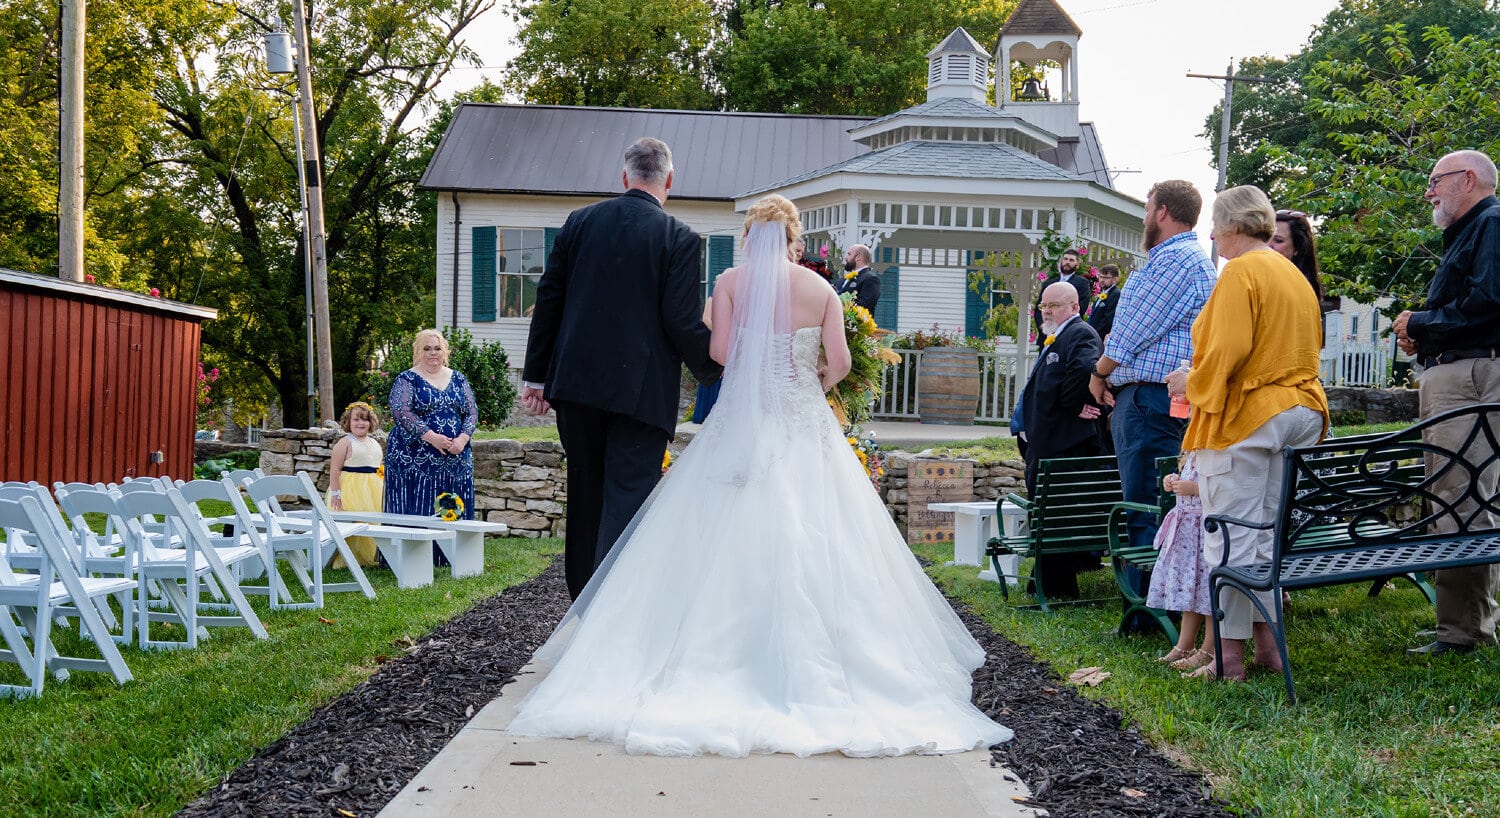 Father walking bride down concrete path toward white gazebo with guests observing from seating area on both sides of walkway.